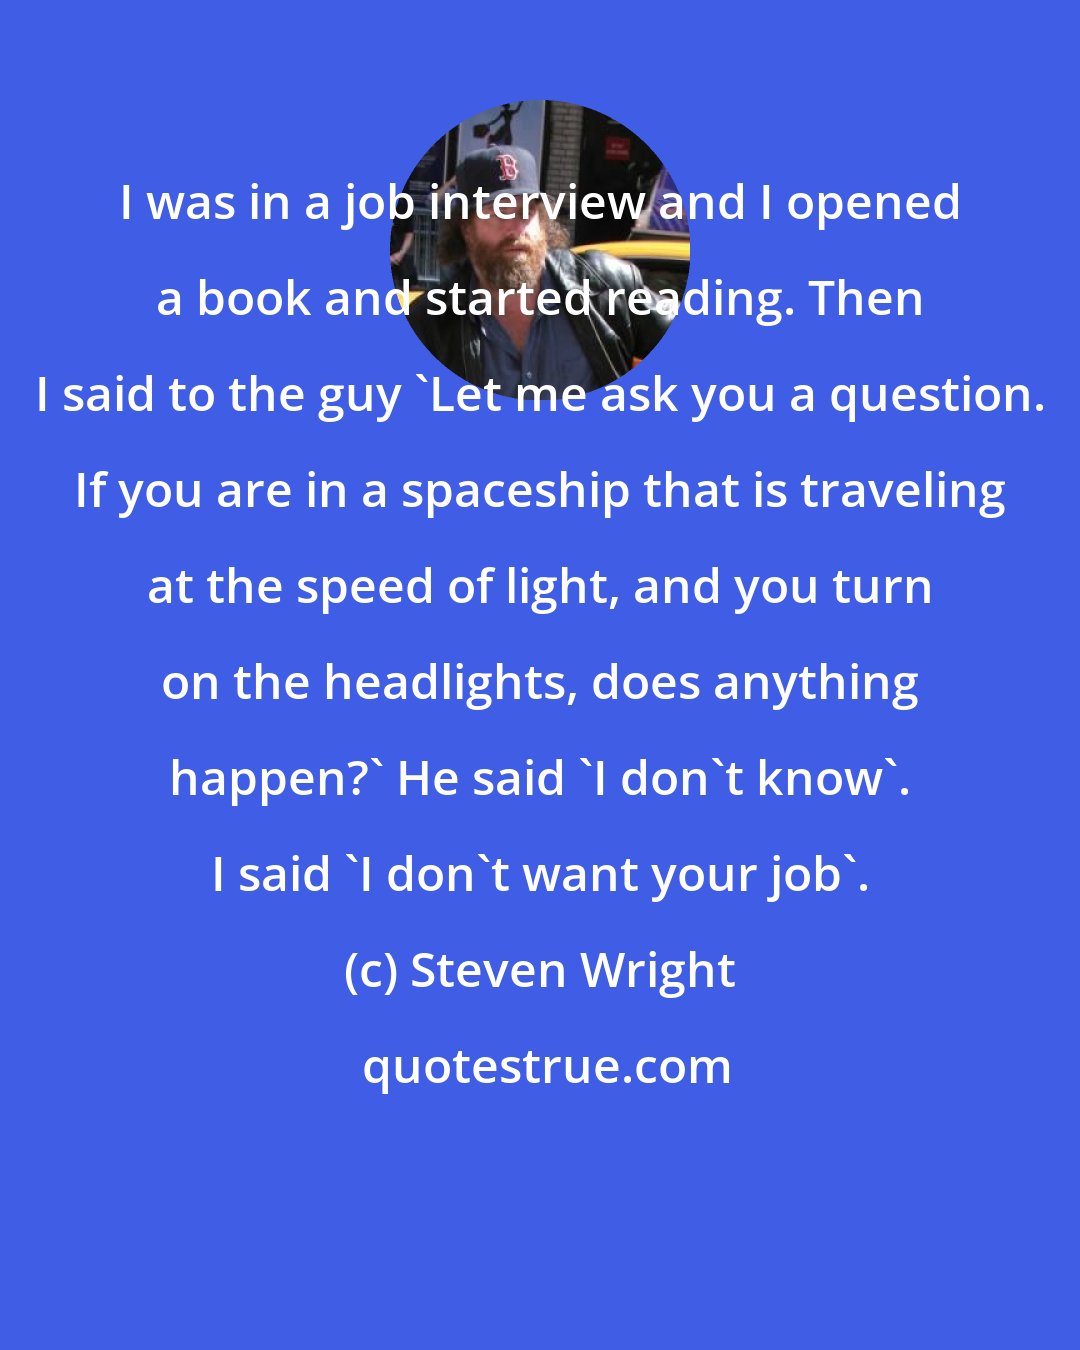 Steven Wright: I was in a job interview and I opened a book and started reading. Then I said to the guy 'Let me ask you a question. If you are in a spaceship that is traveling at the speed of light, and you turn on the headlights, does anything happen?' He said 'I don't know'. I said 'I don't want your job'.